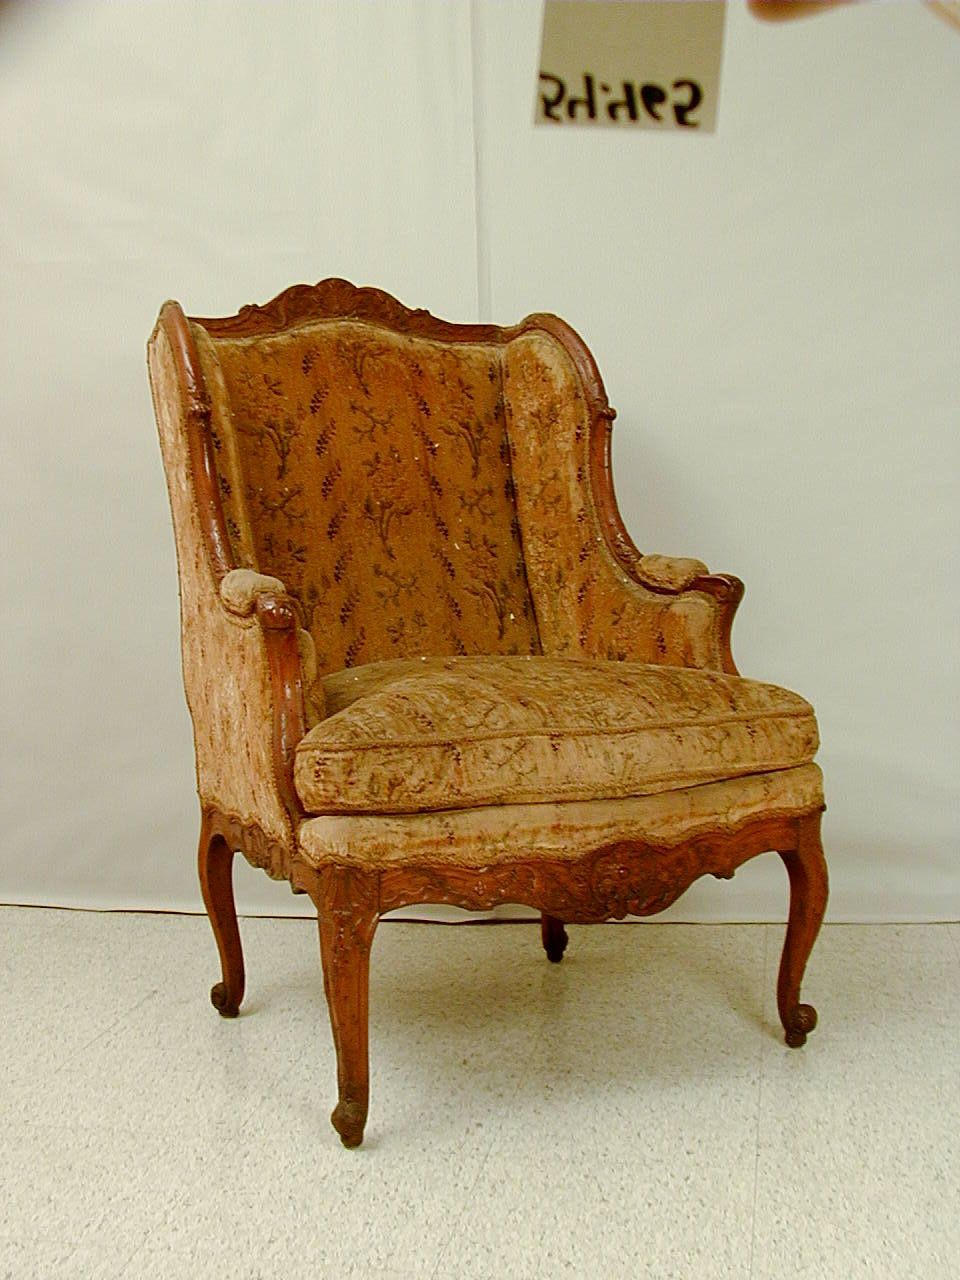 Detroit Institute Of Arts Museum Regarding Oglesby Armchairs (View 13 of 20)